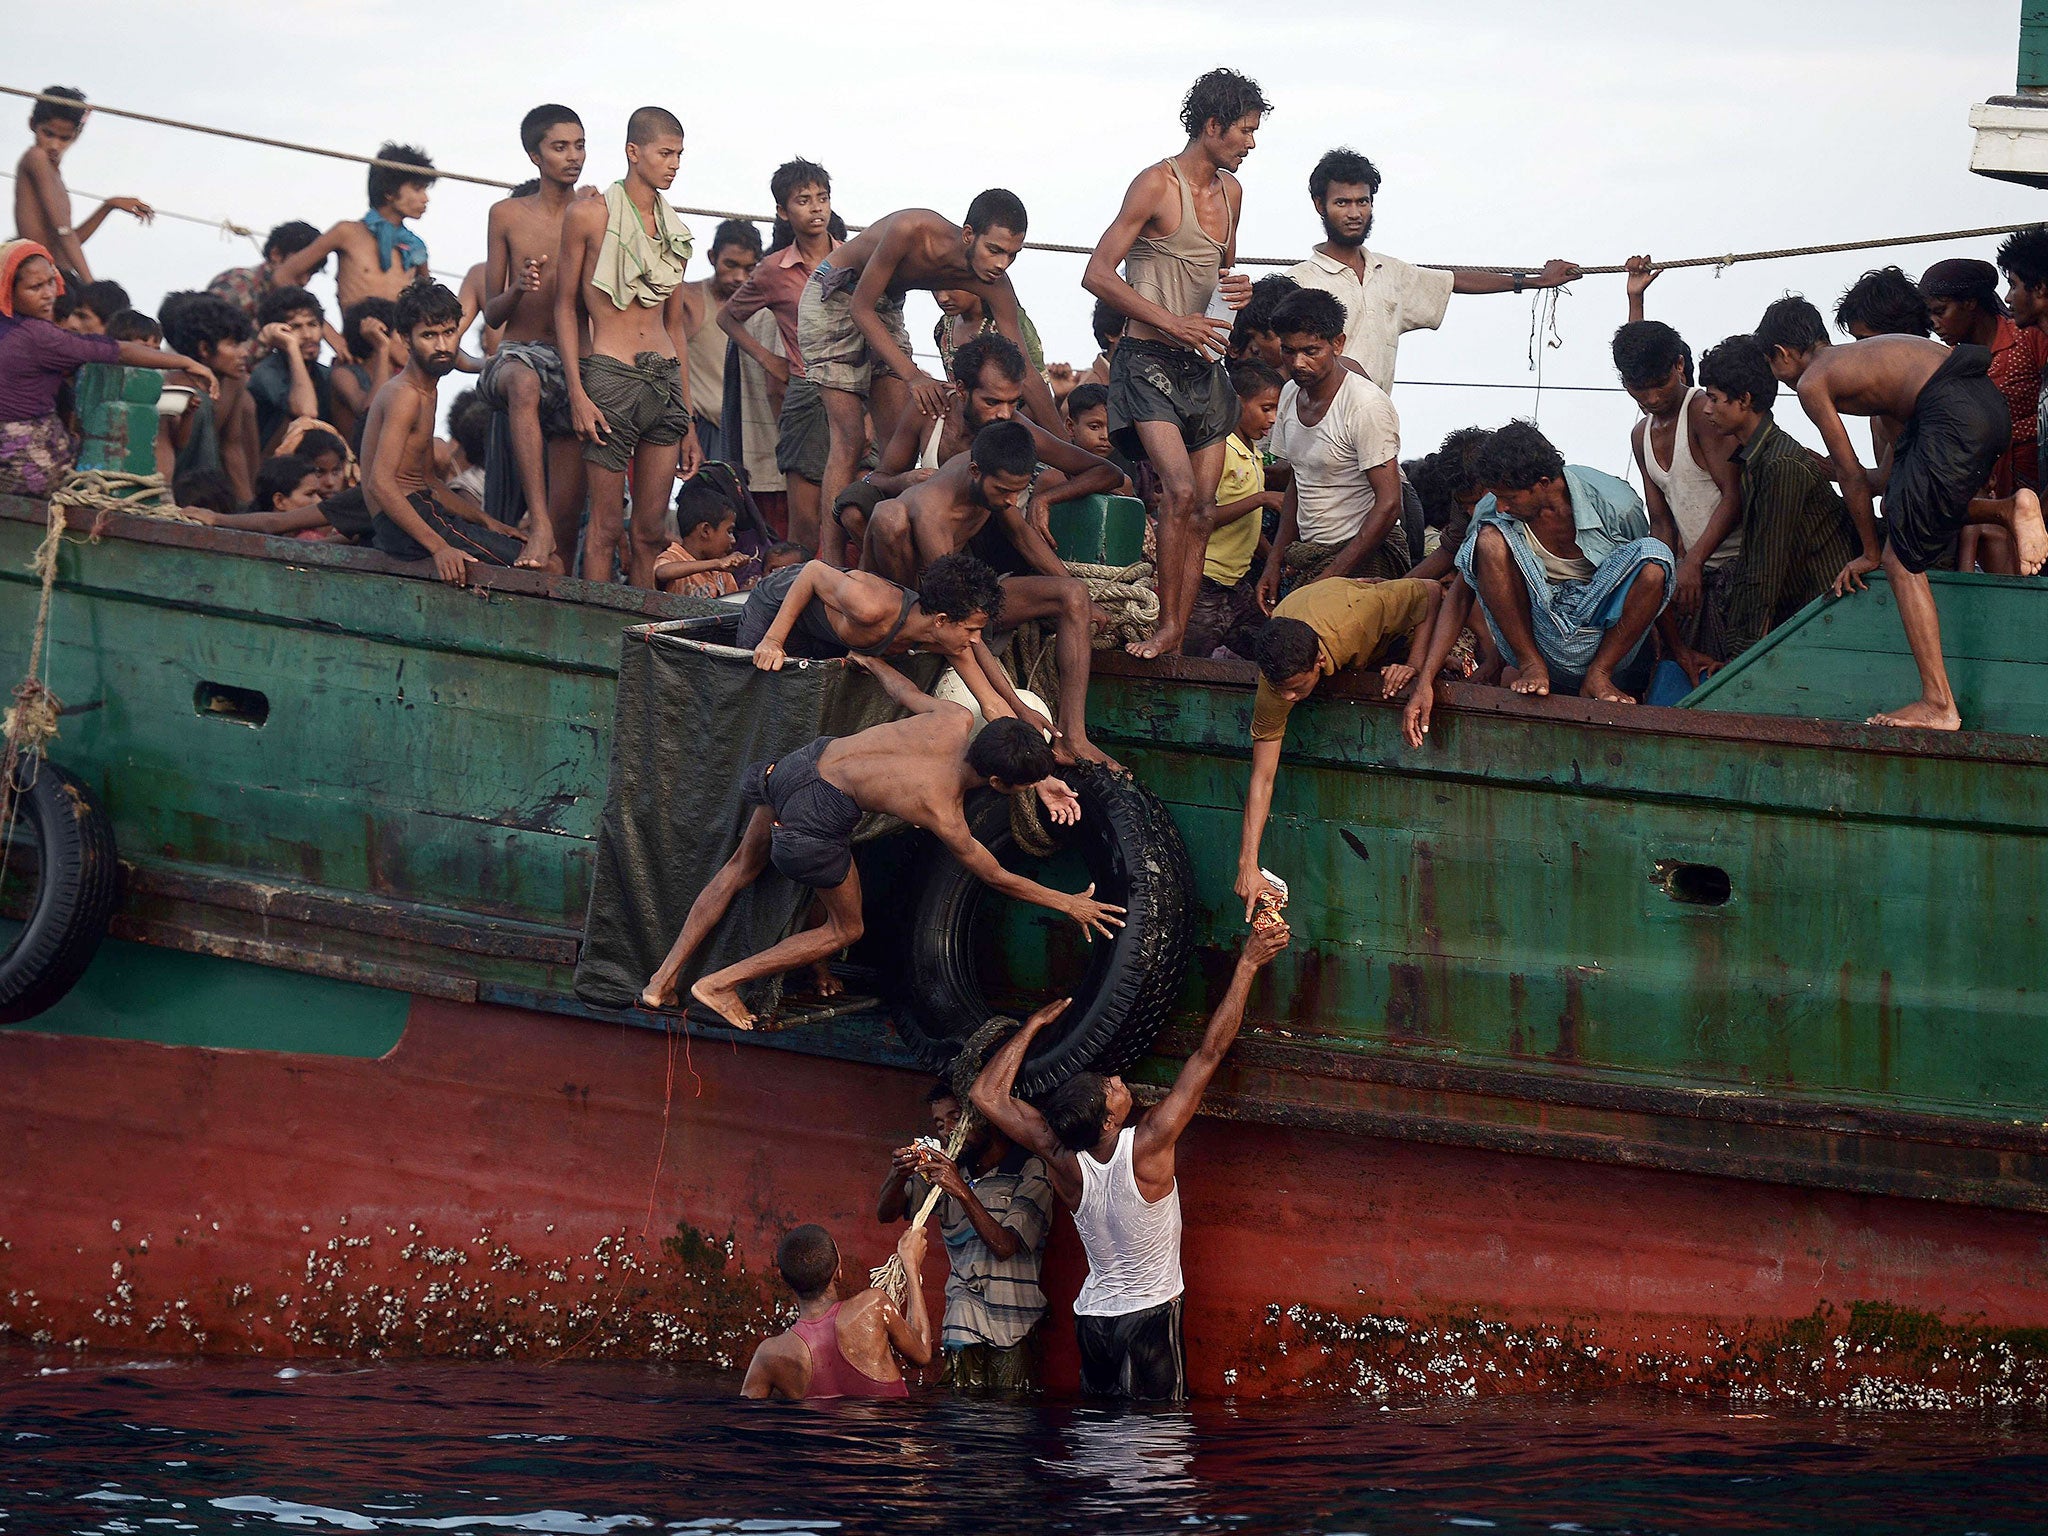 As well as the refugee crisis in Europe, thousands of asylum seekers have also been crossing the Andaman Sea